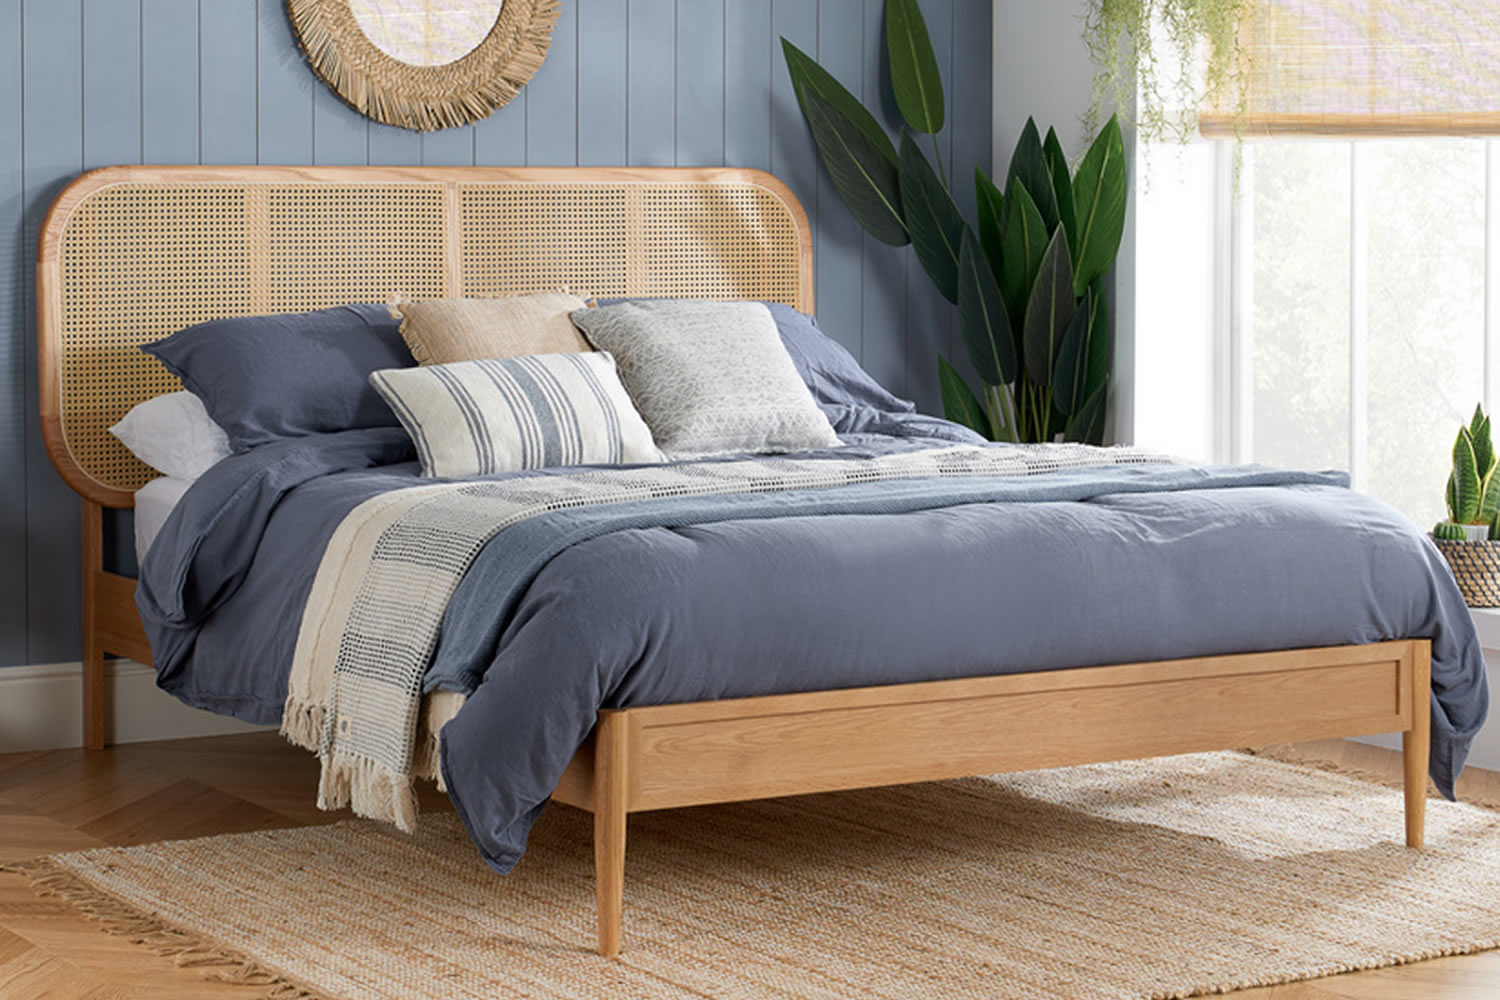 View Elina 46 Double Wooden Bed Frame Crafted From Solid Oak Curved Rattan Headboard Low Foot End Sturdy Legs Sprung Slatted Base information